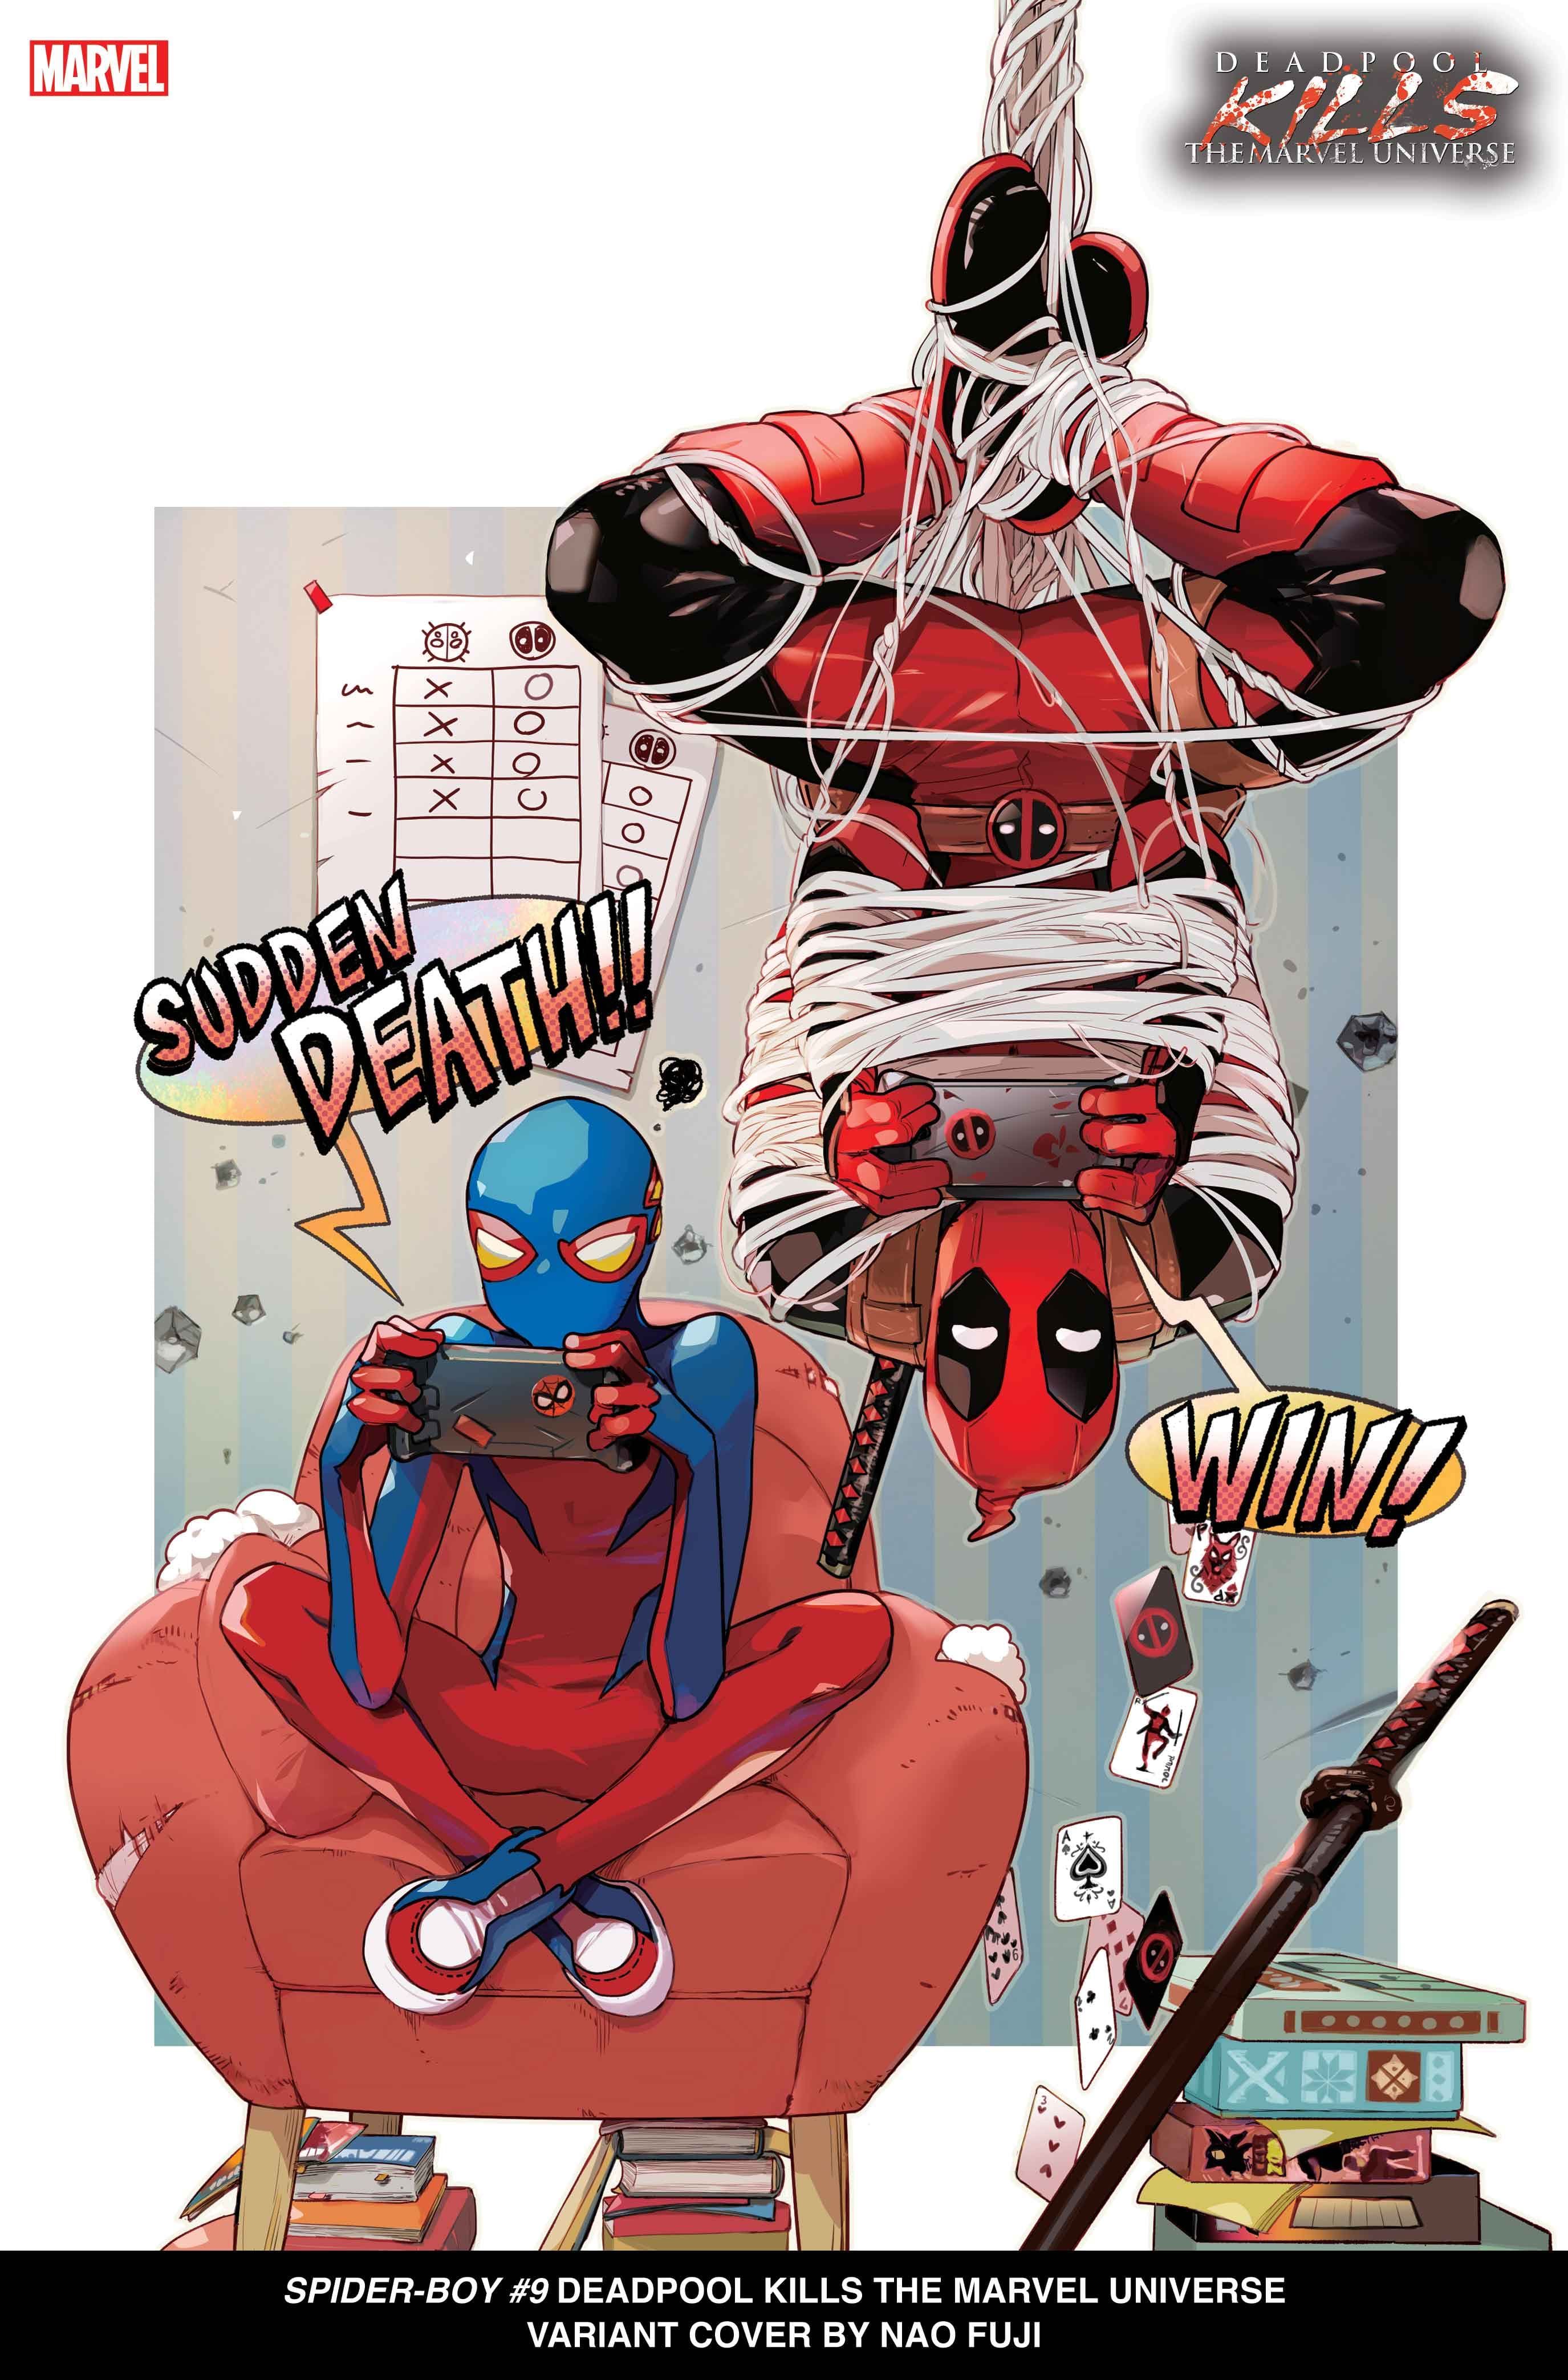 SPIDER-BOY #9 Deadpool Kills the Marvel Universe Variant Cover by Nao Fuji